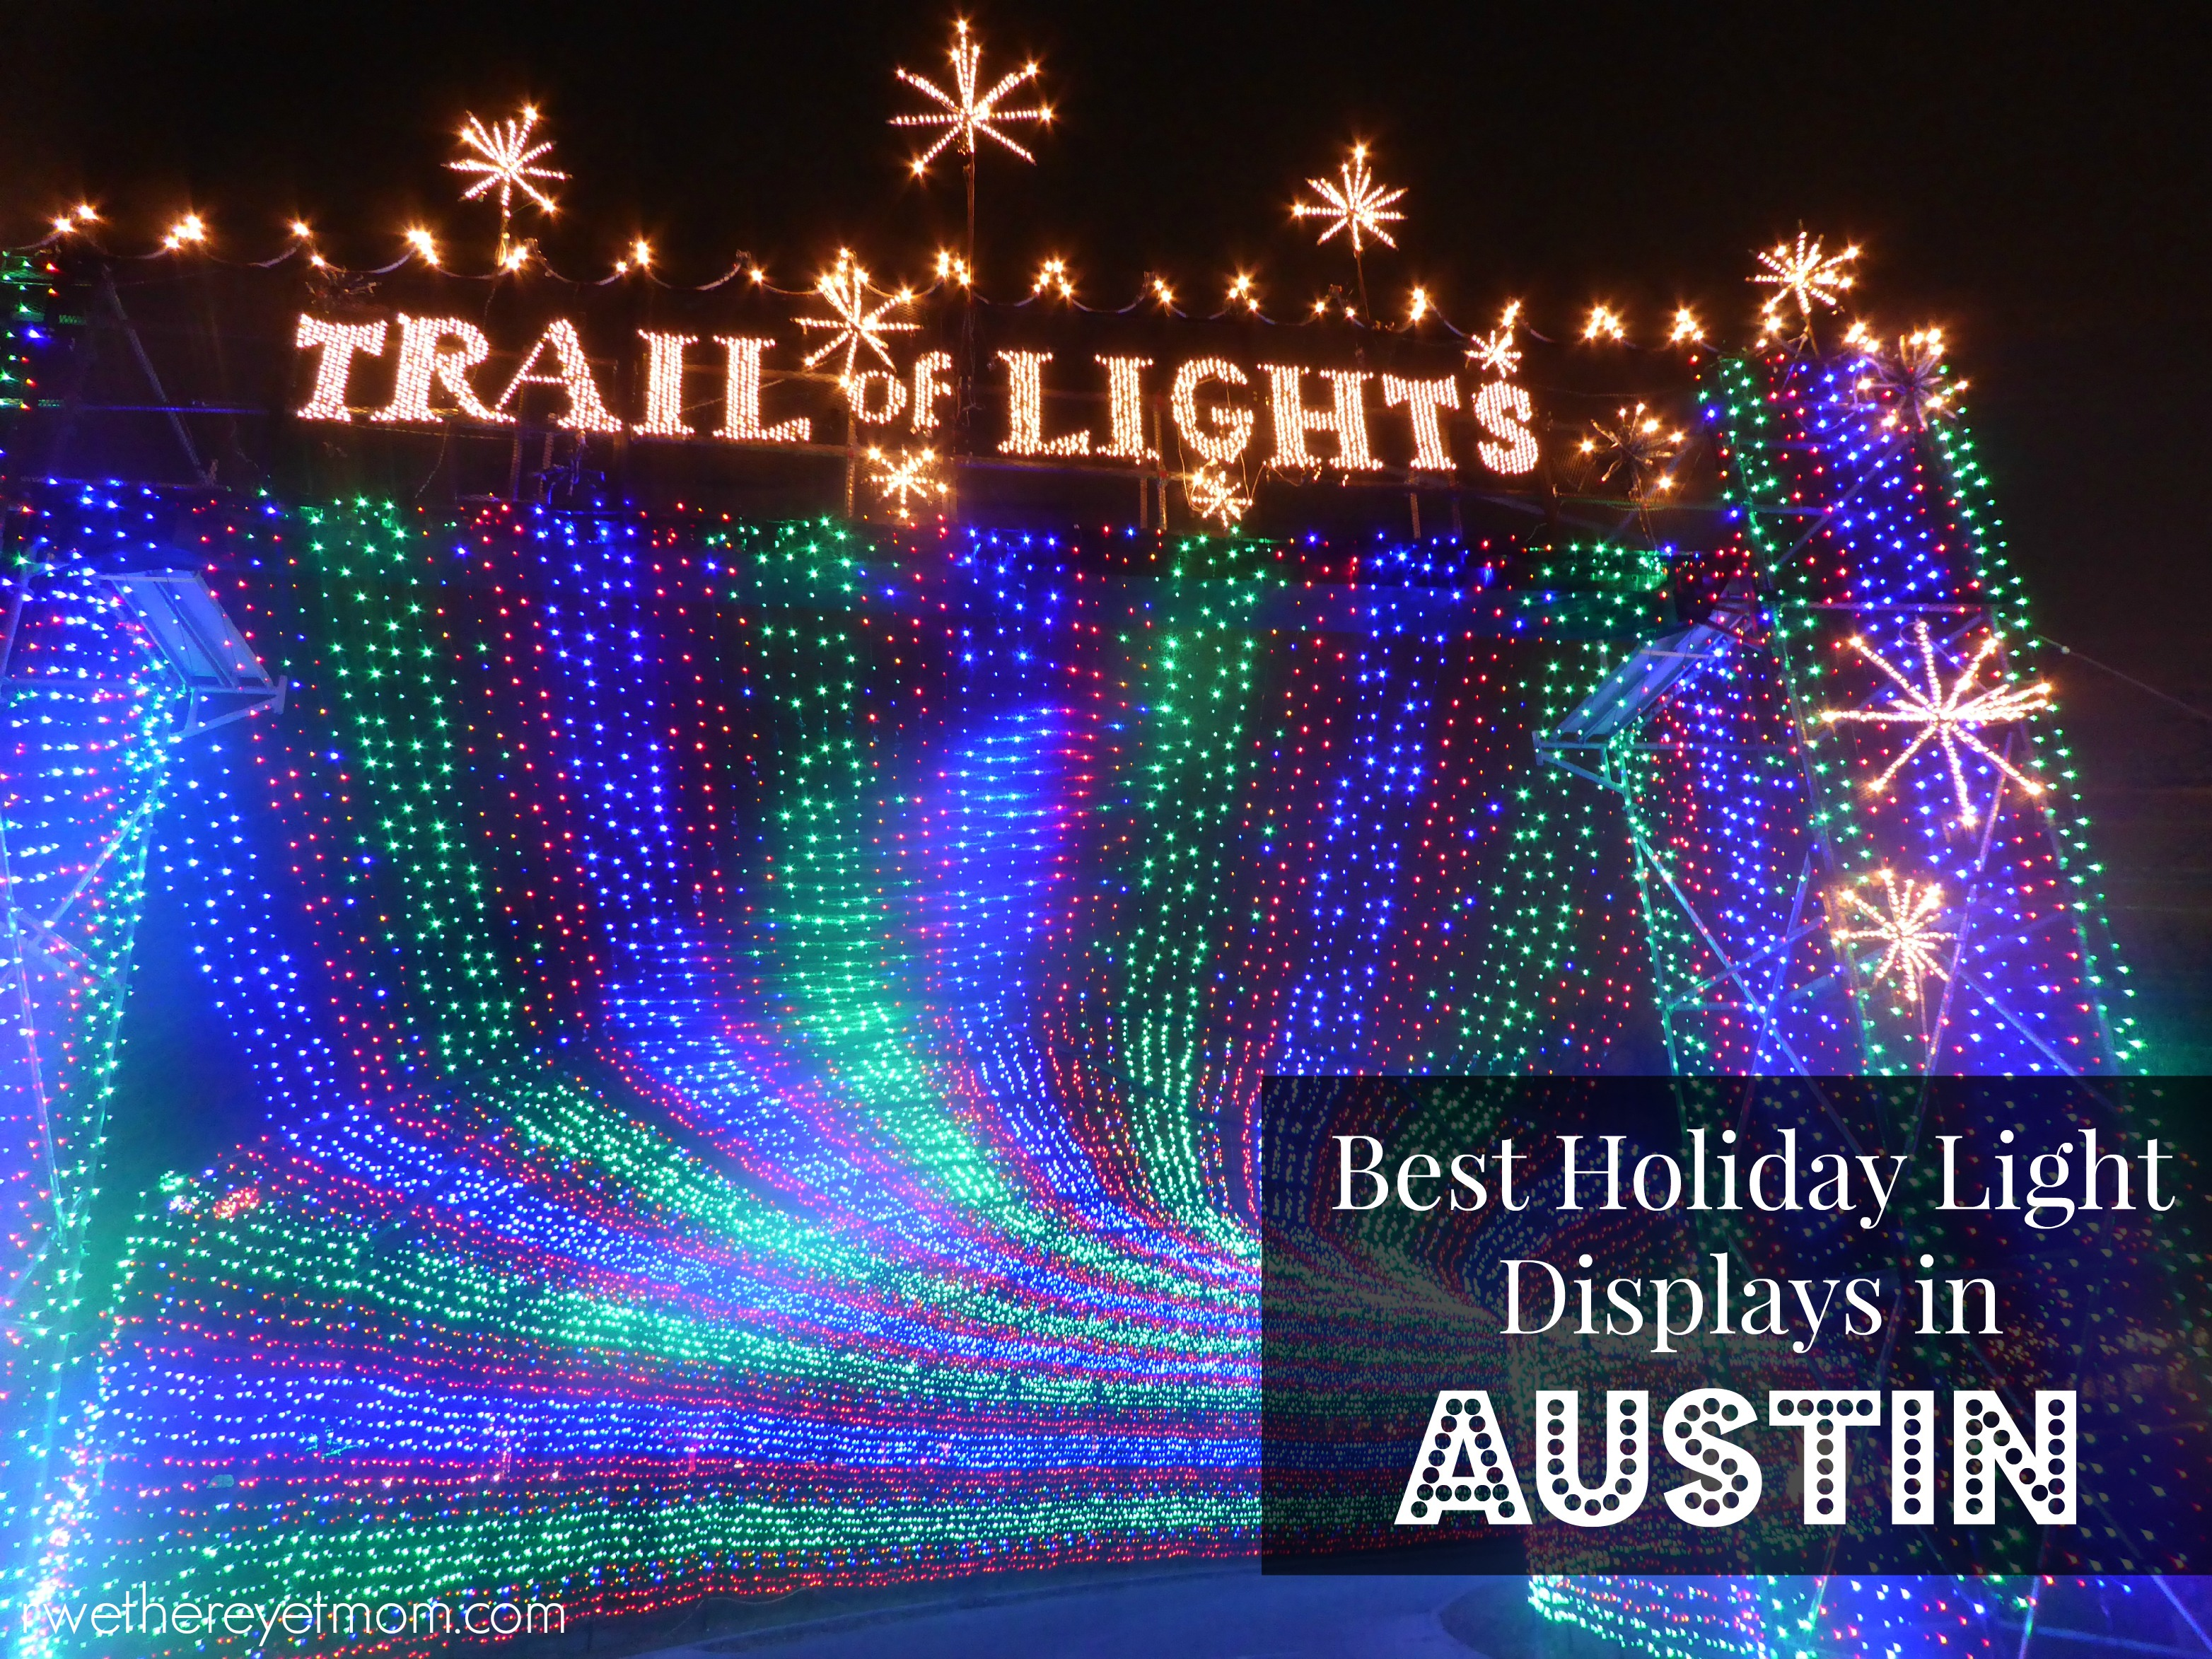 Best Holiday Light Displays in Austin: 2021